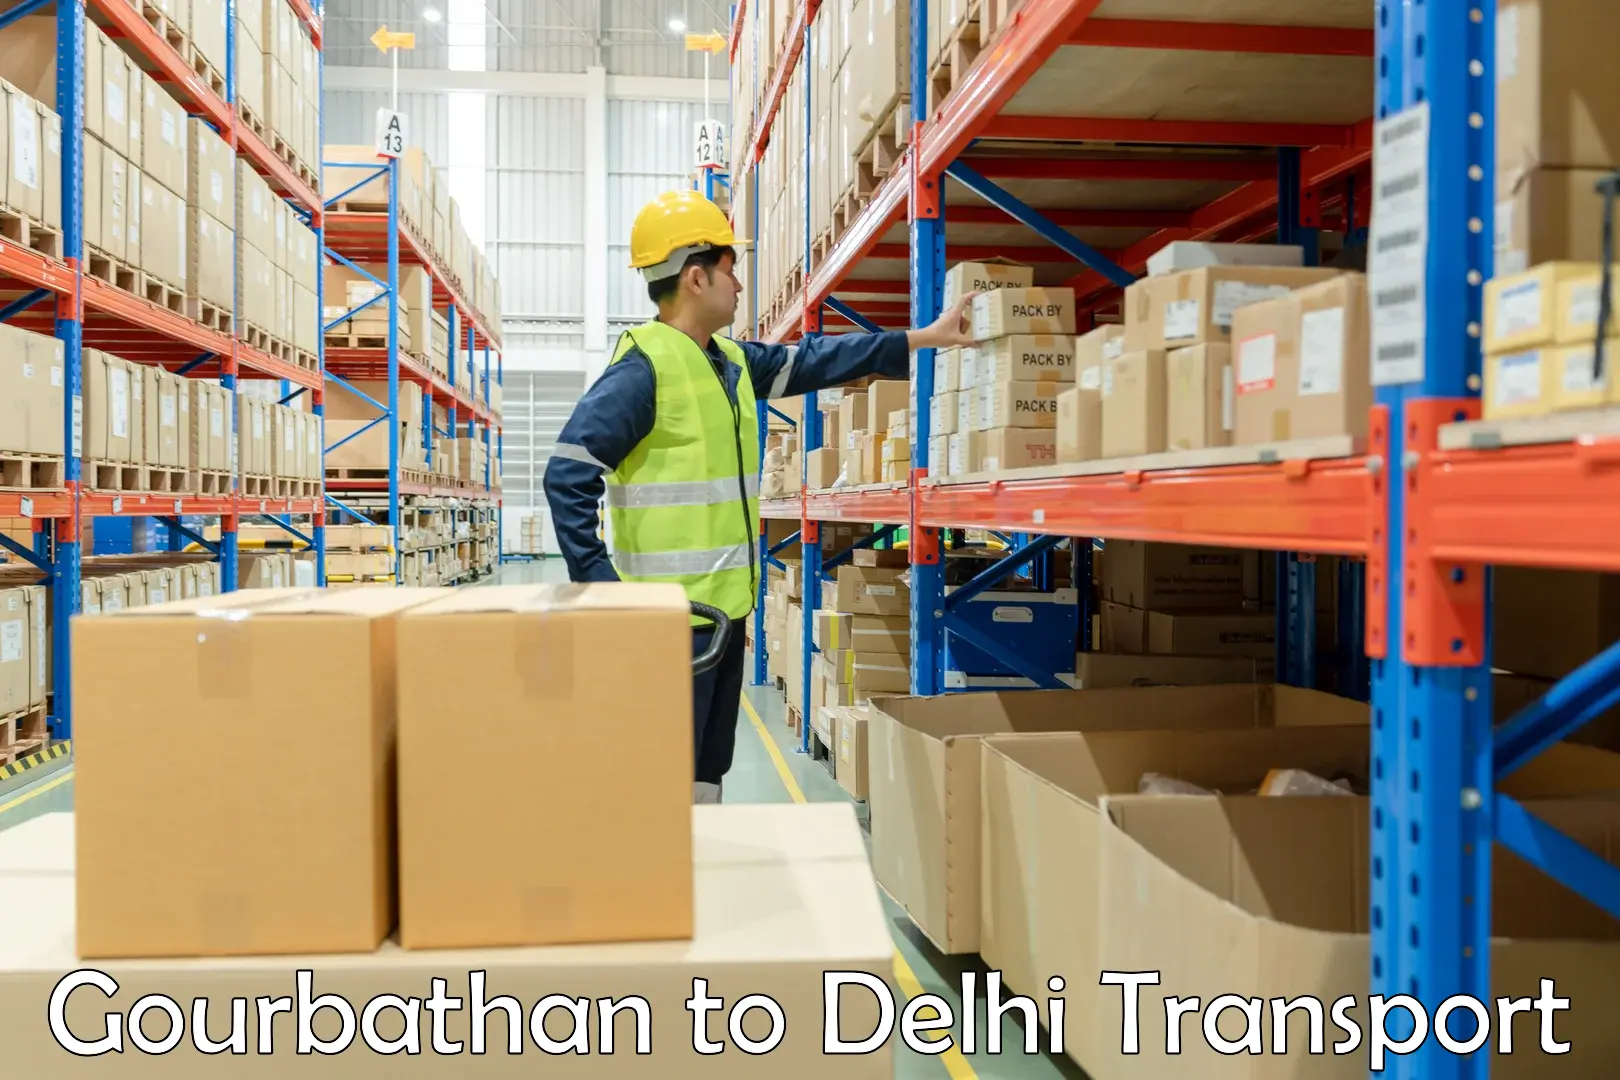 Vehicle transport services Gourbathan to East Delhi